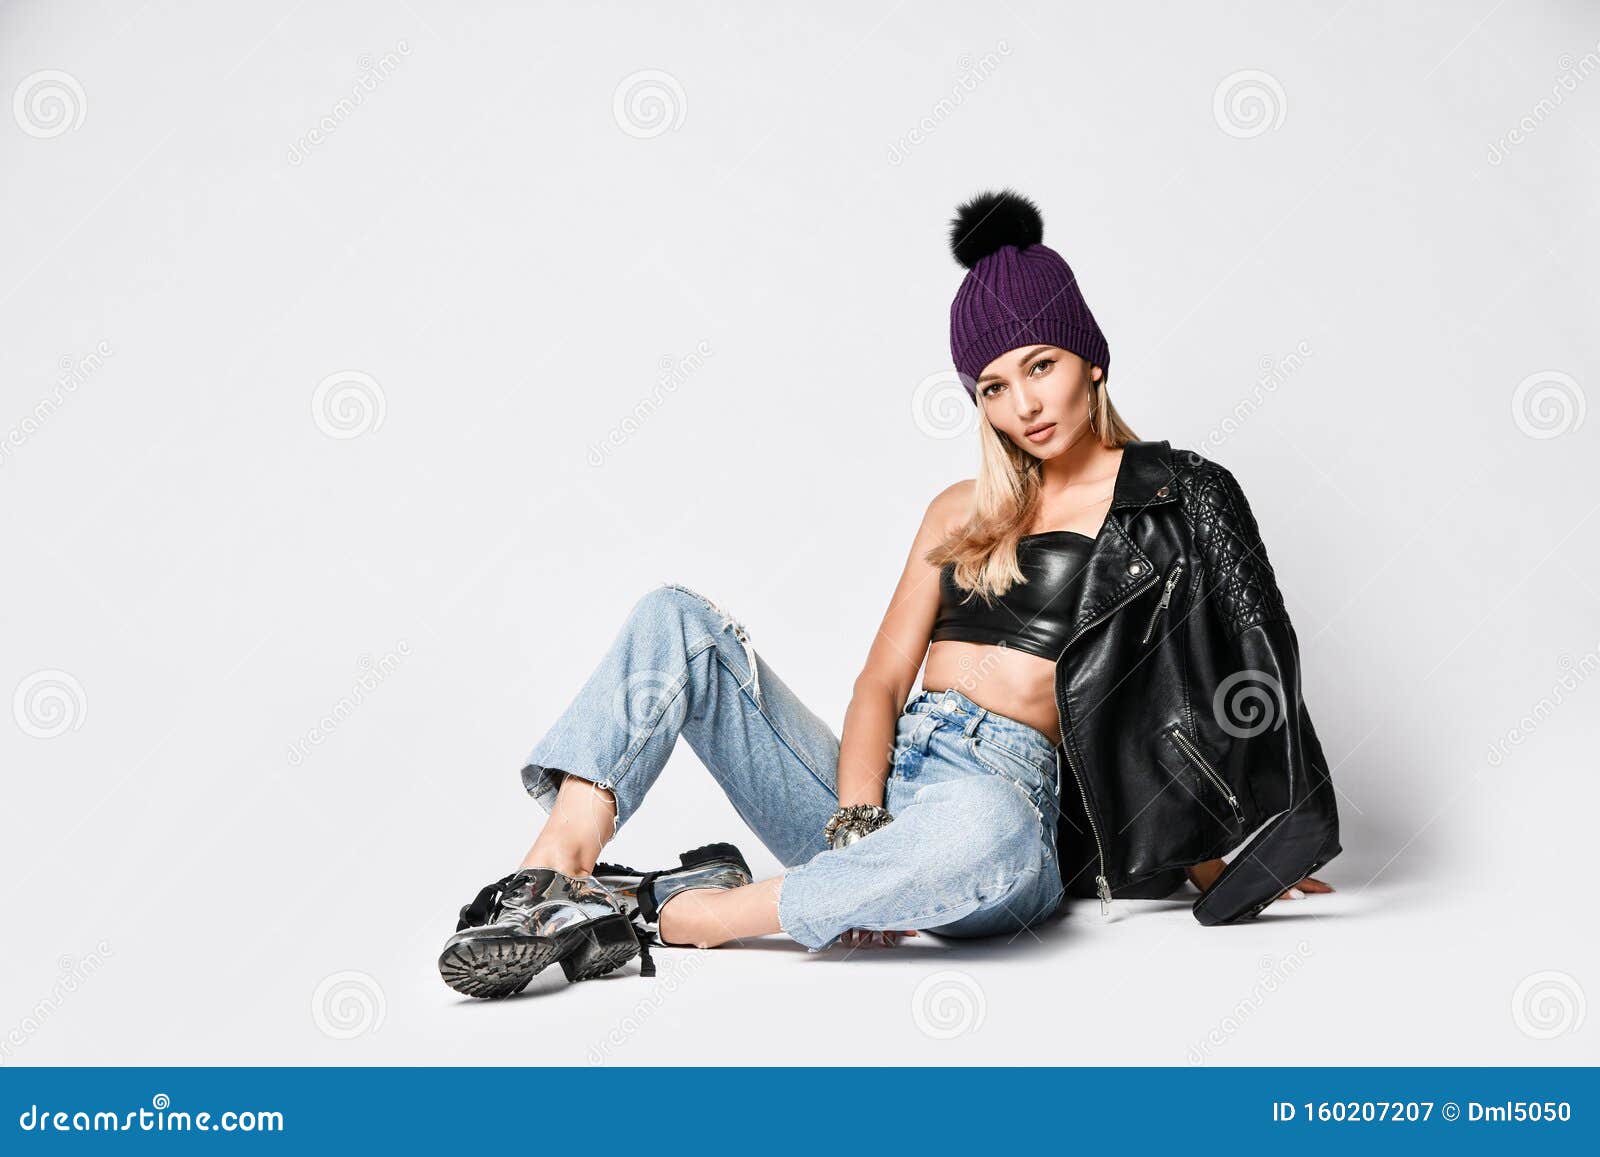 Biker Style Woman in Torn Jeans, Leather Top and Jacket, Winter Hat and  Brutal Shoes Sitting on White Looks in Camera Stock Image - Image of  frosty, leather: 160207207